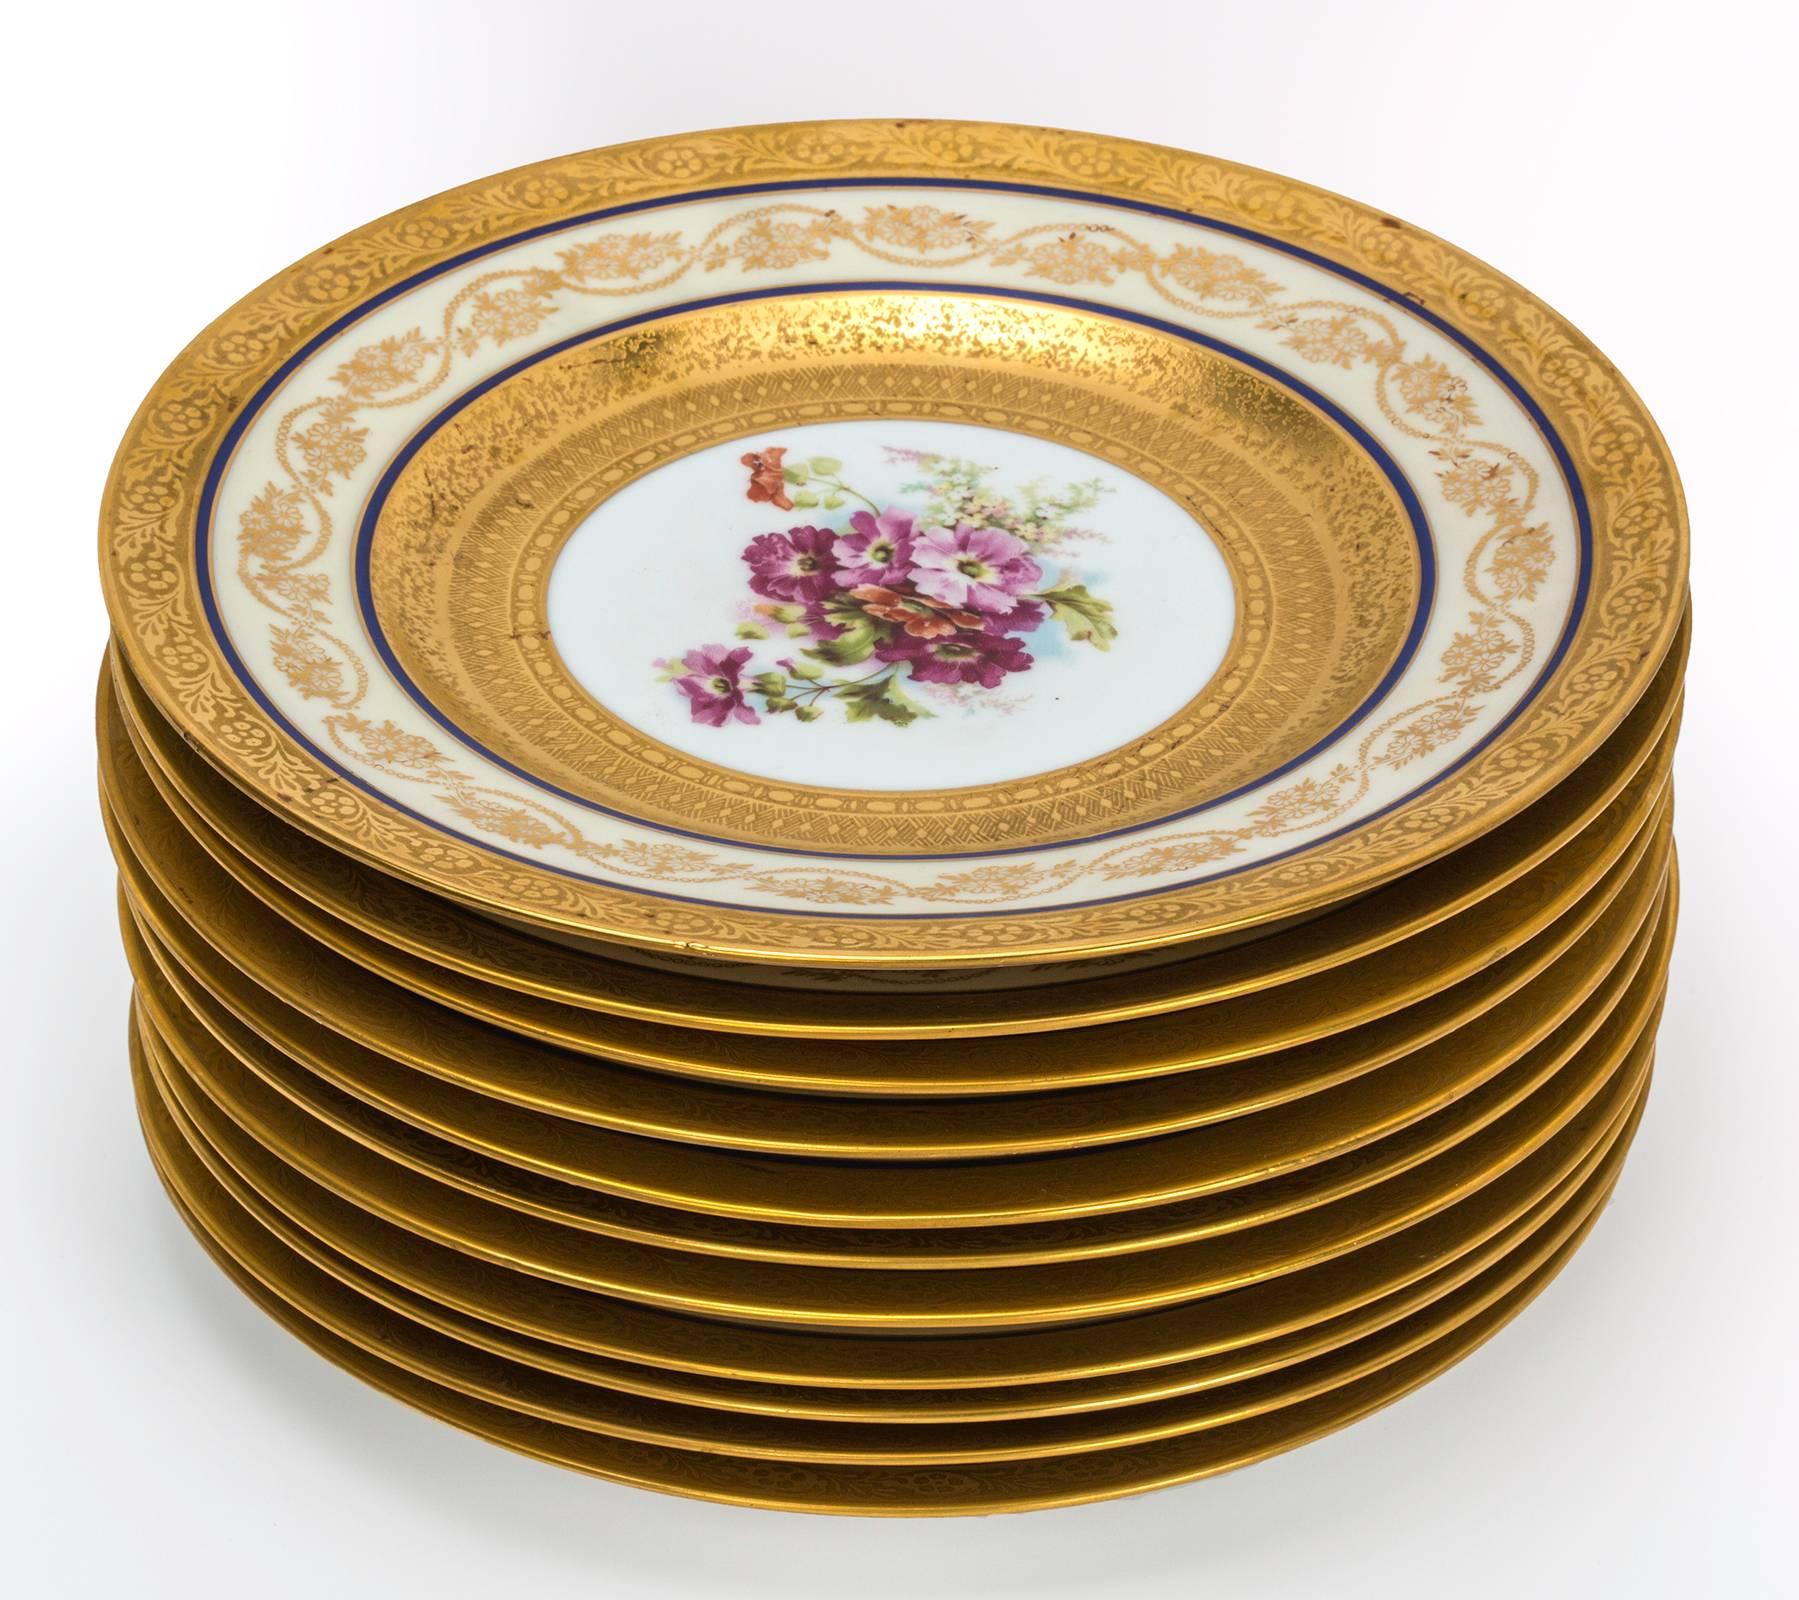 Early 20th Century German Hand-Painted Dinner Plates